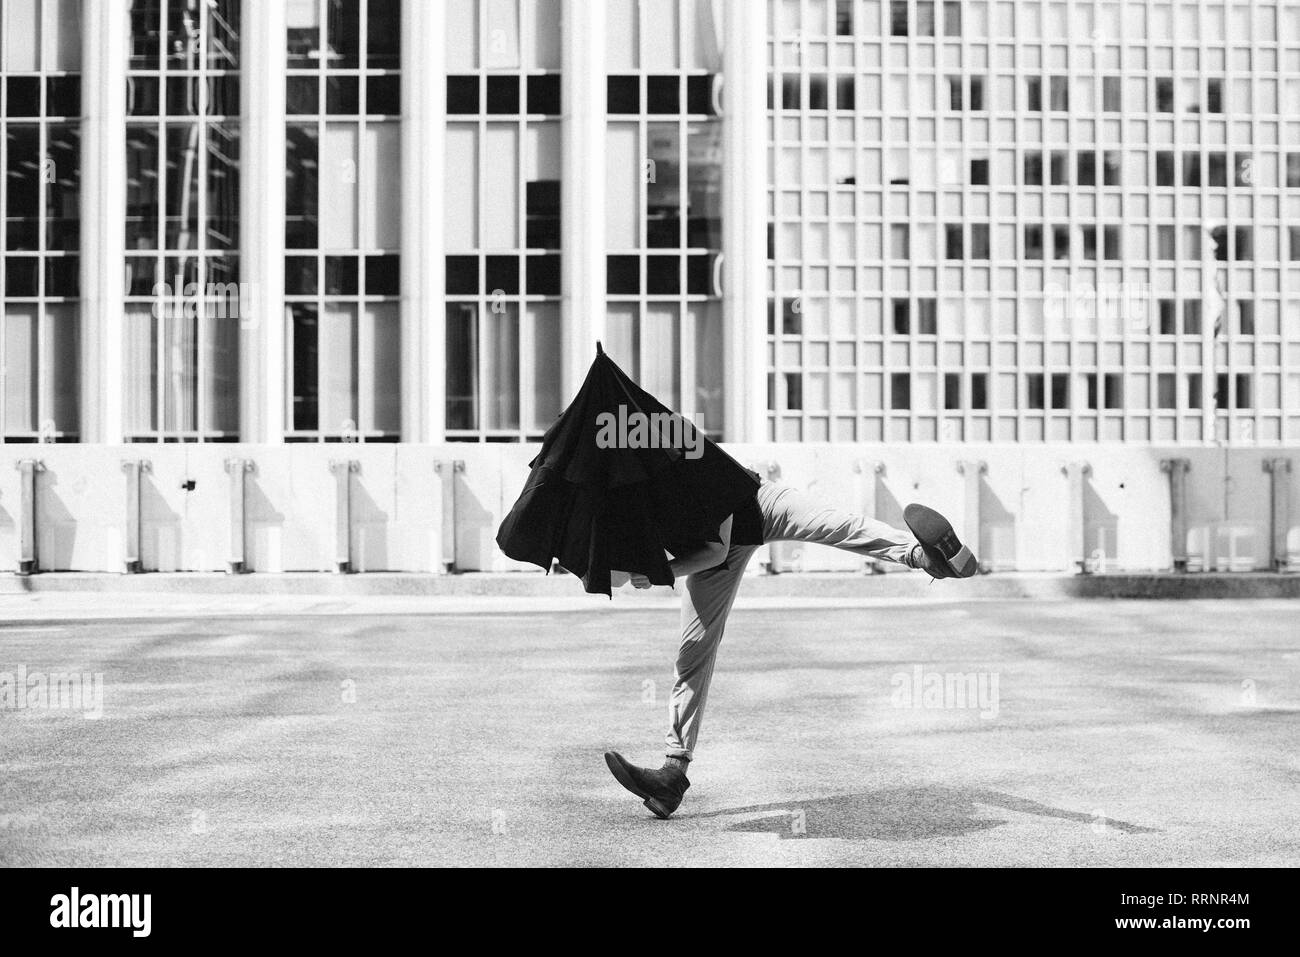 Man dancing with umbrella on head outside urban buildings Stock Photo